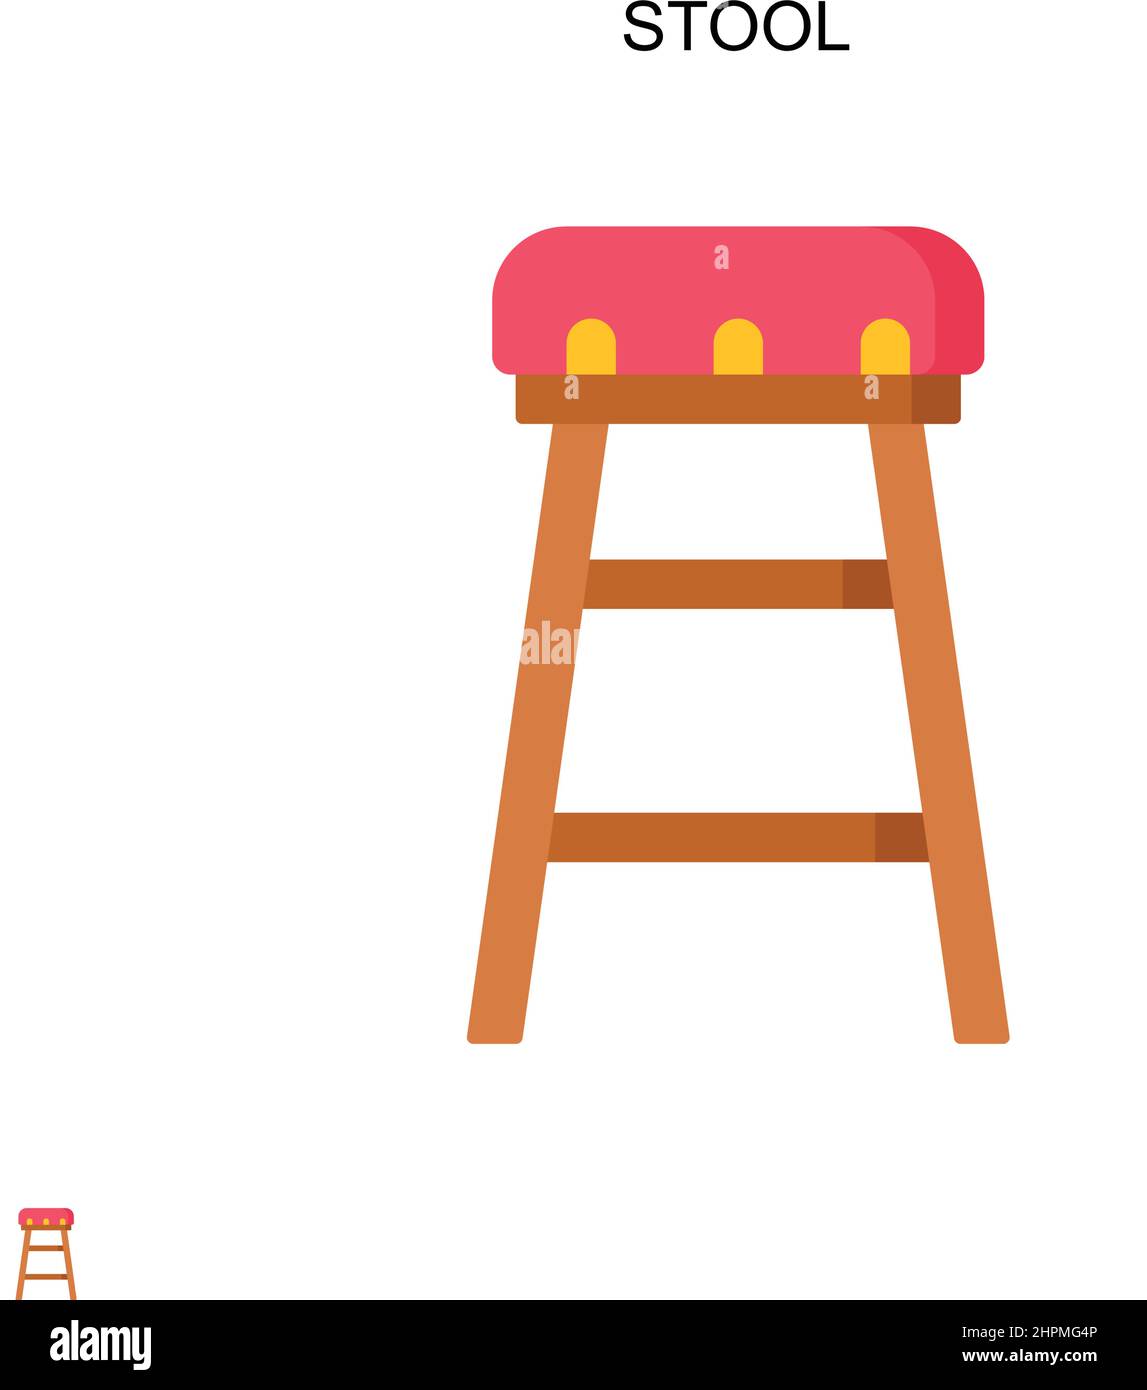 Stool Simple vector icon. Illustration symbol design template for web mobile UI element. Stock Vector